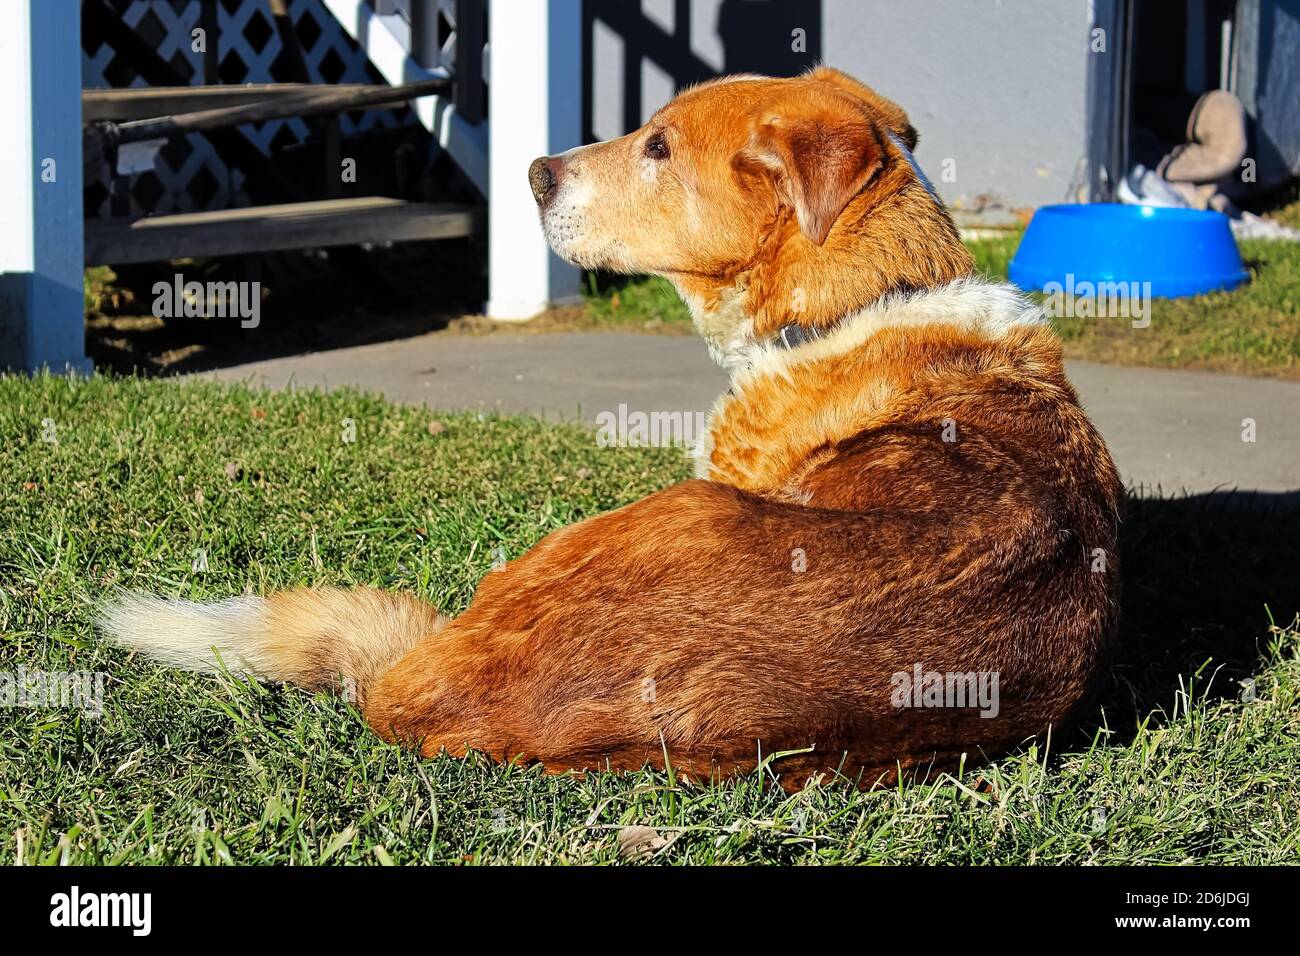 A farm dog sitting with a bowl in the background Stock Photo